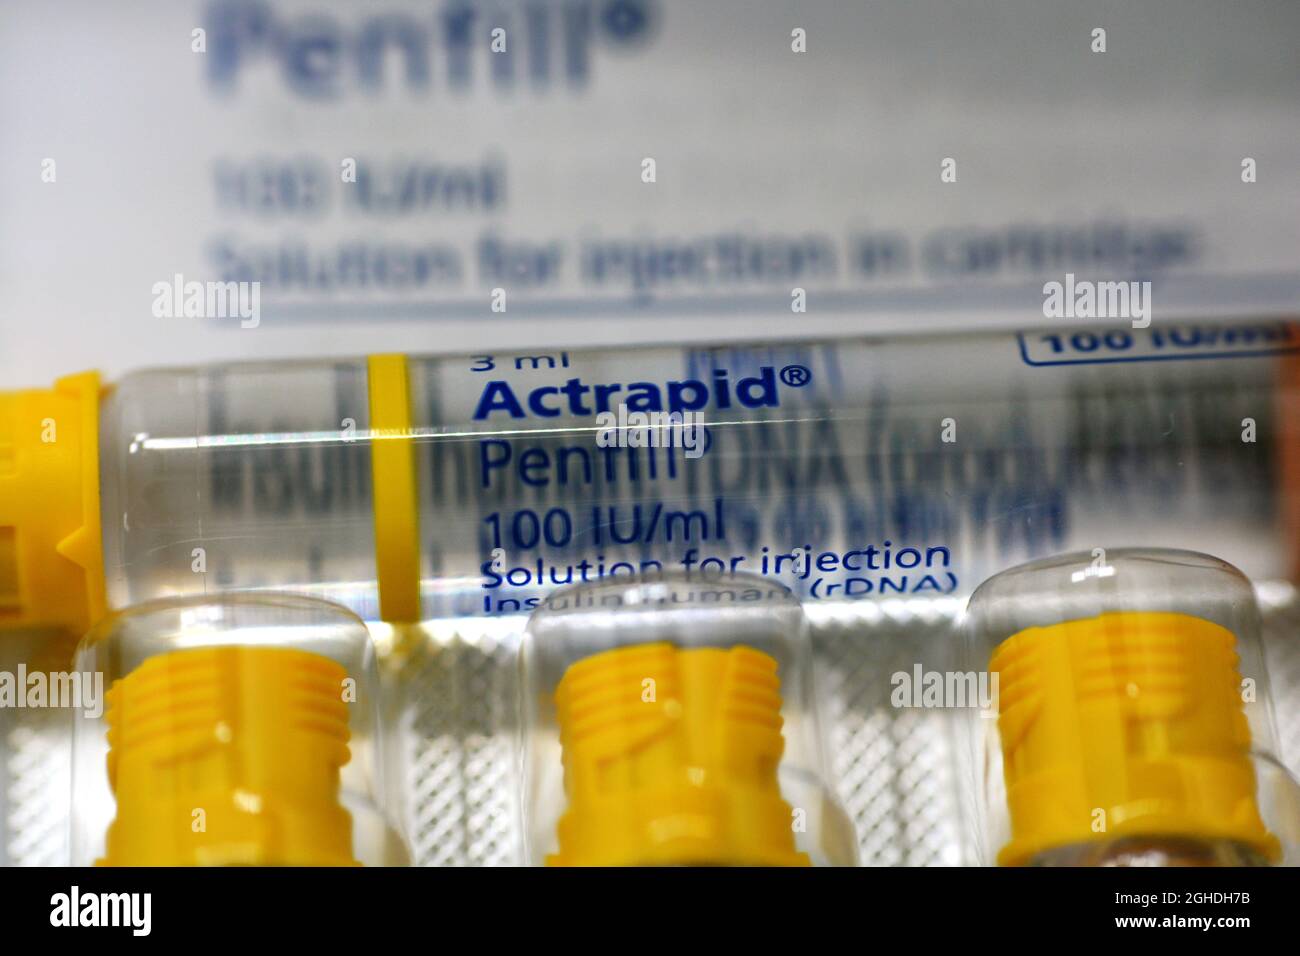 Actrapid human insulin rDNA penfill 100 IU solution for subcutaneous or intravenous injection in cartridge for use with Novo Nordisk devices Stock Photo